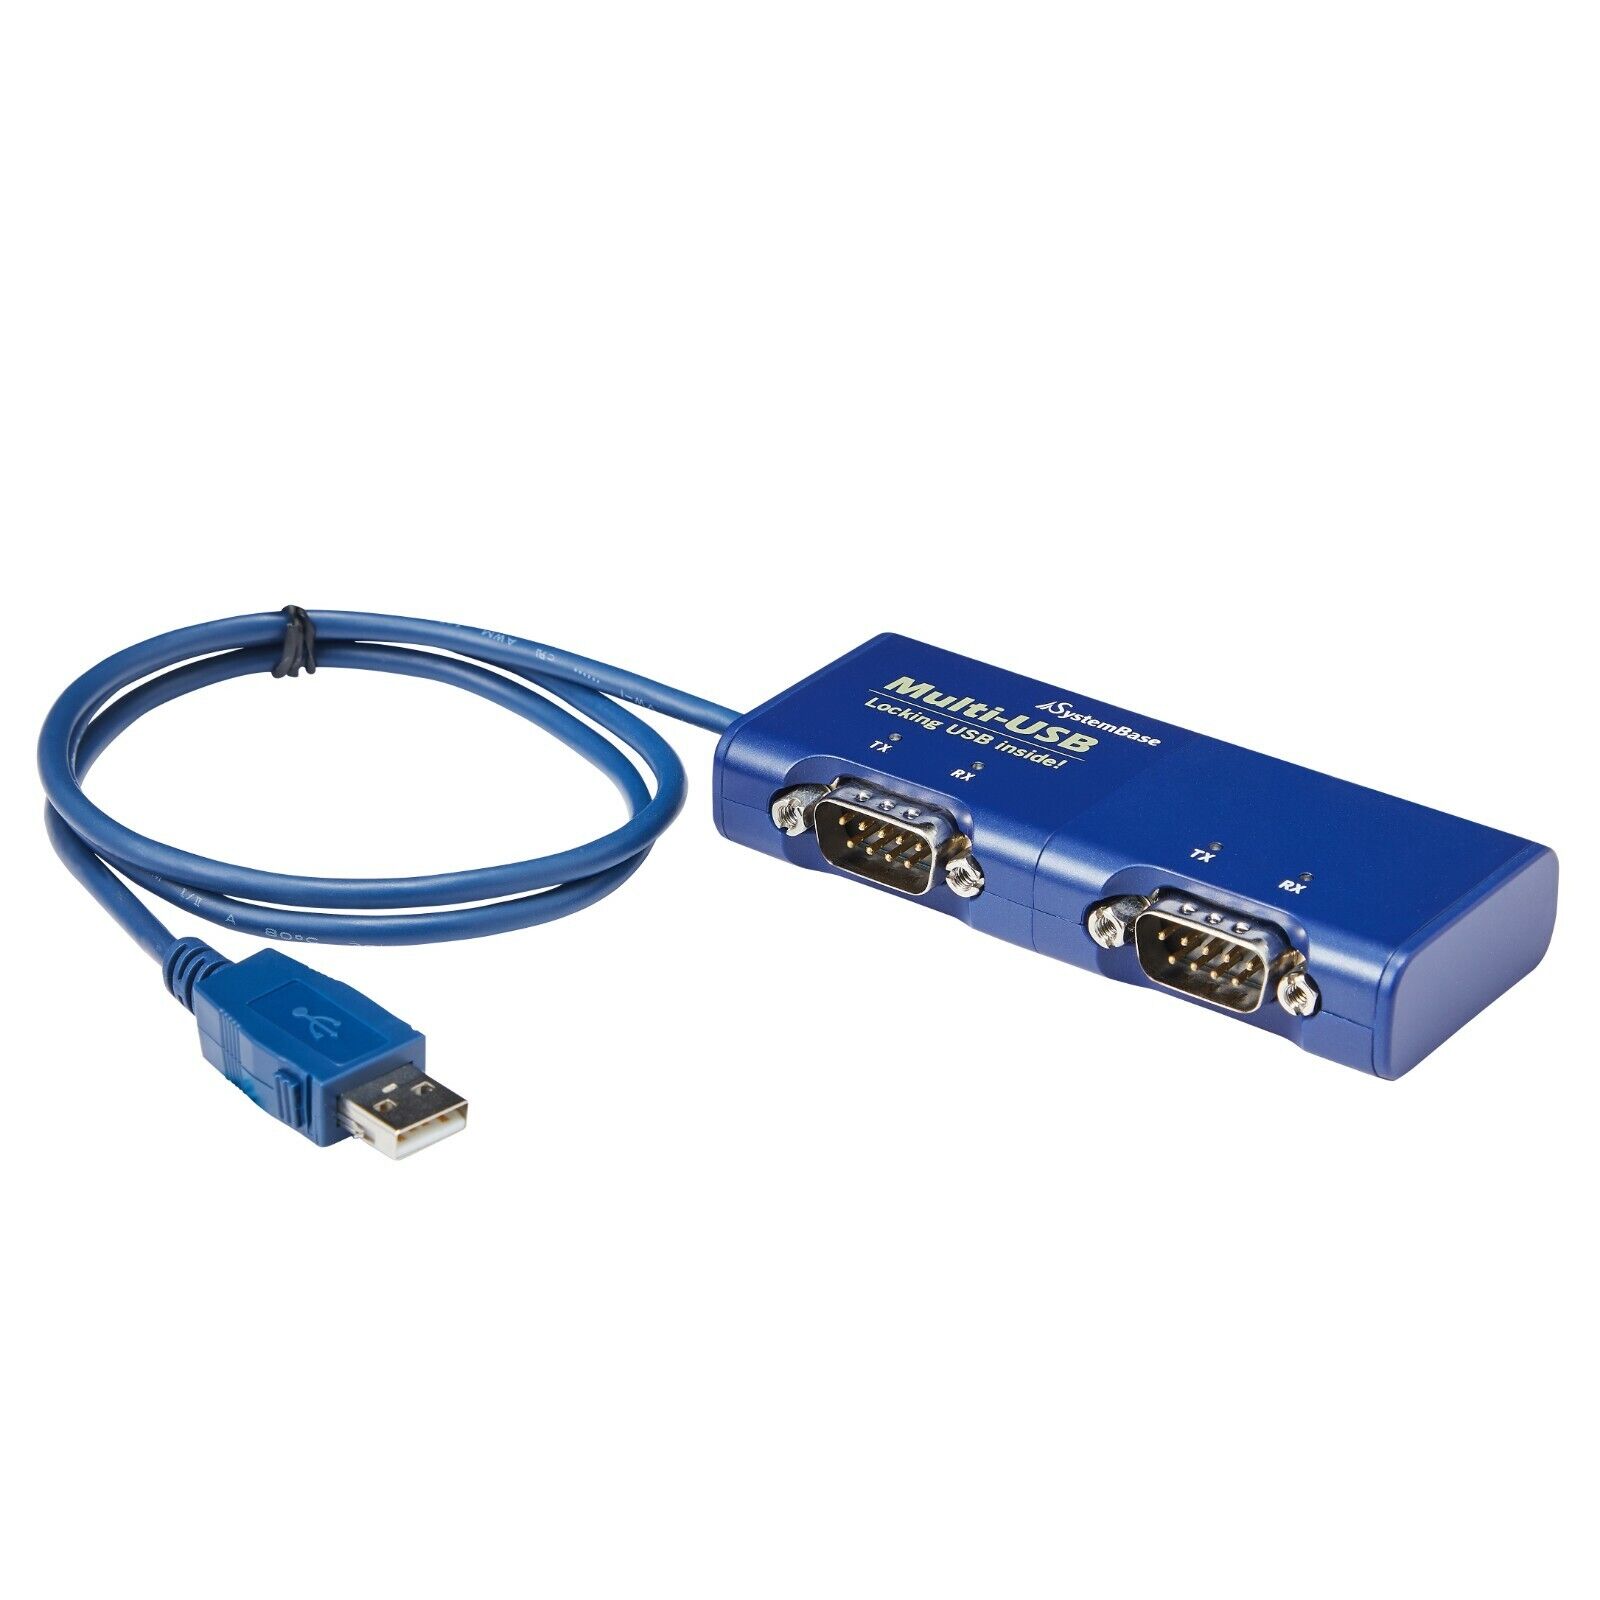 USB to RS-232 2-Port DB9 Serial Adapter/Converter SystemBase Multi-2/USB RS232